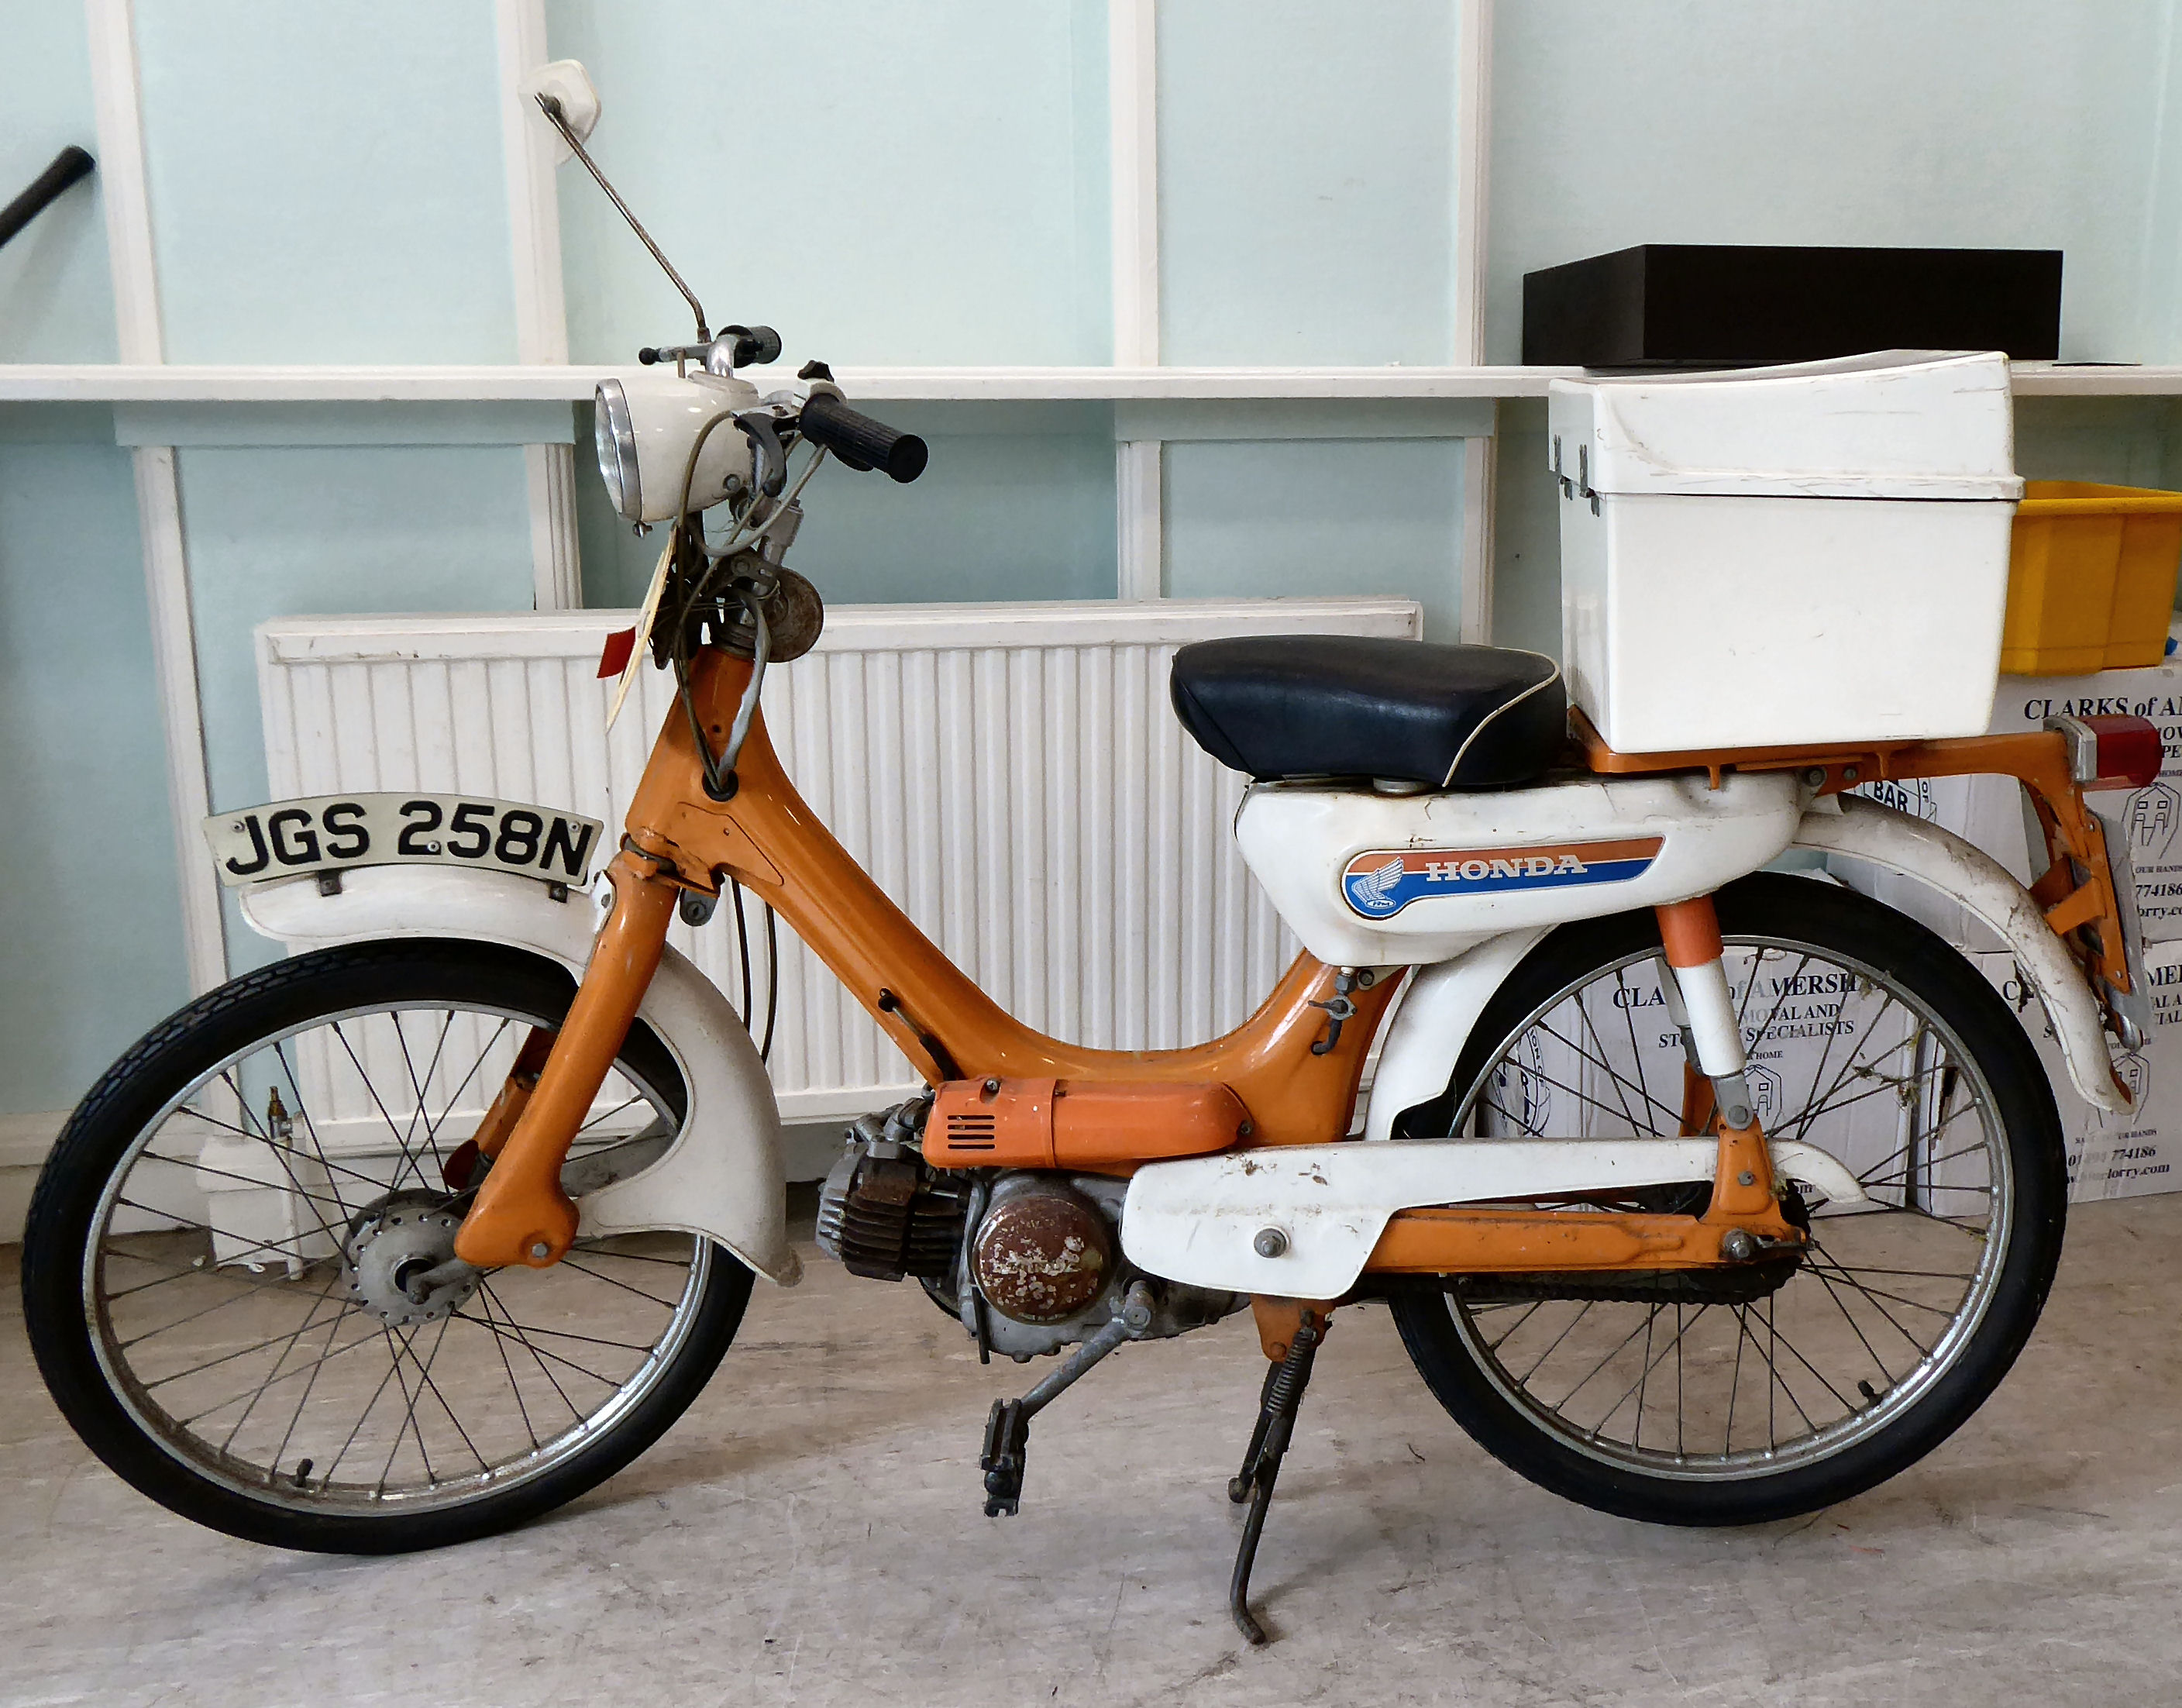 A 1975 Honda 49cc moped in orange and white livery, original registration plates for JGS 258N but no - Image 8 of 12